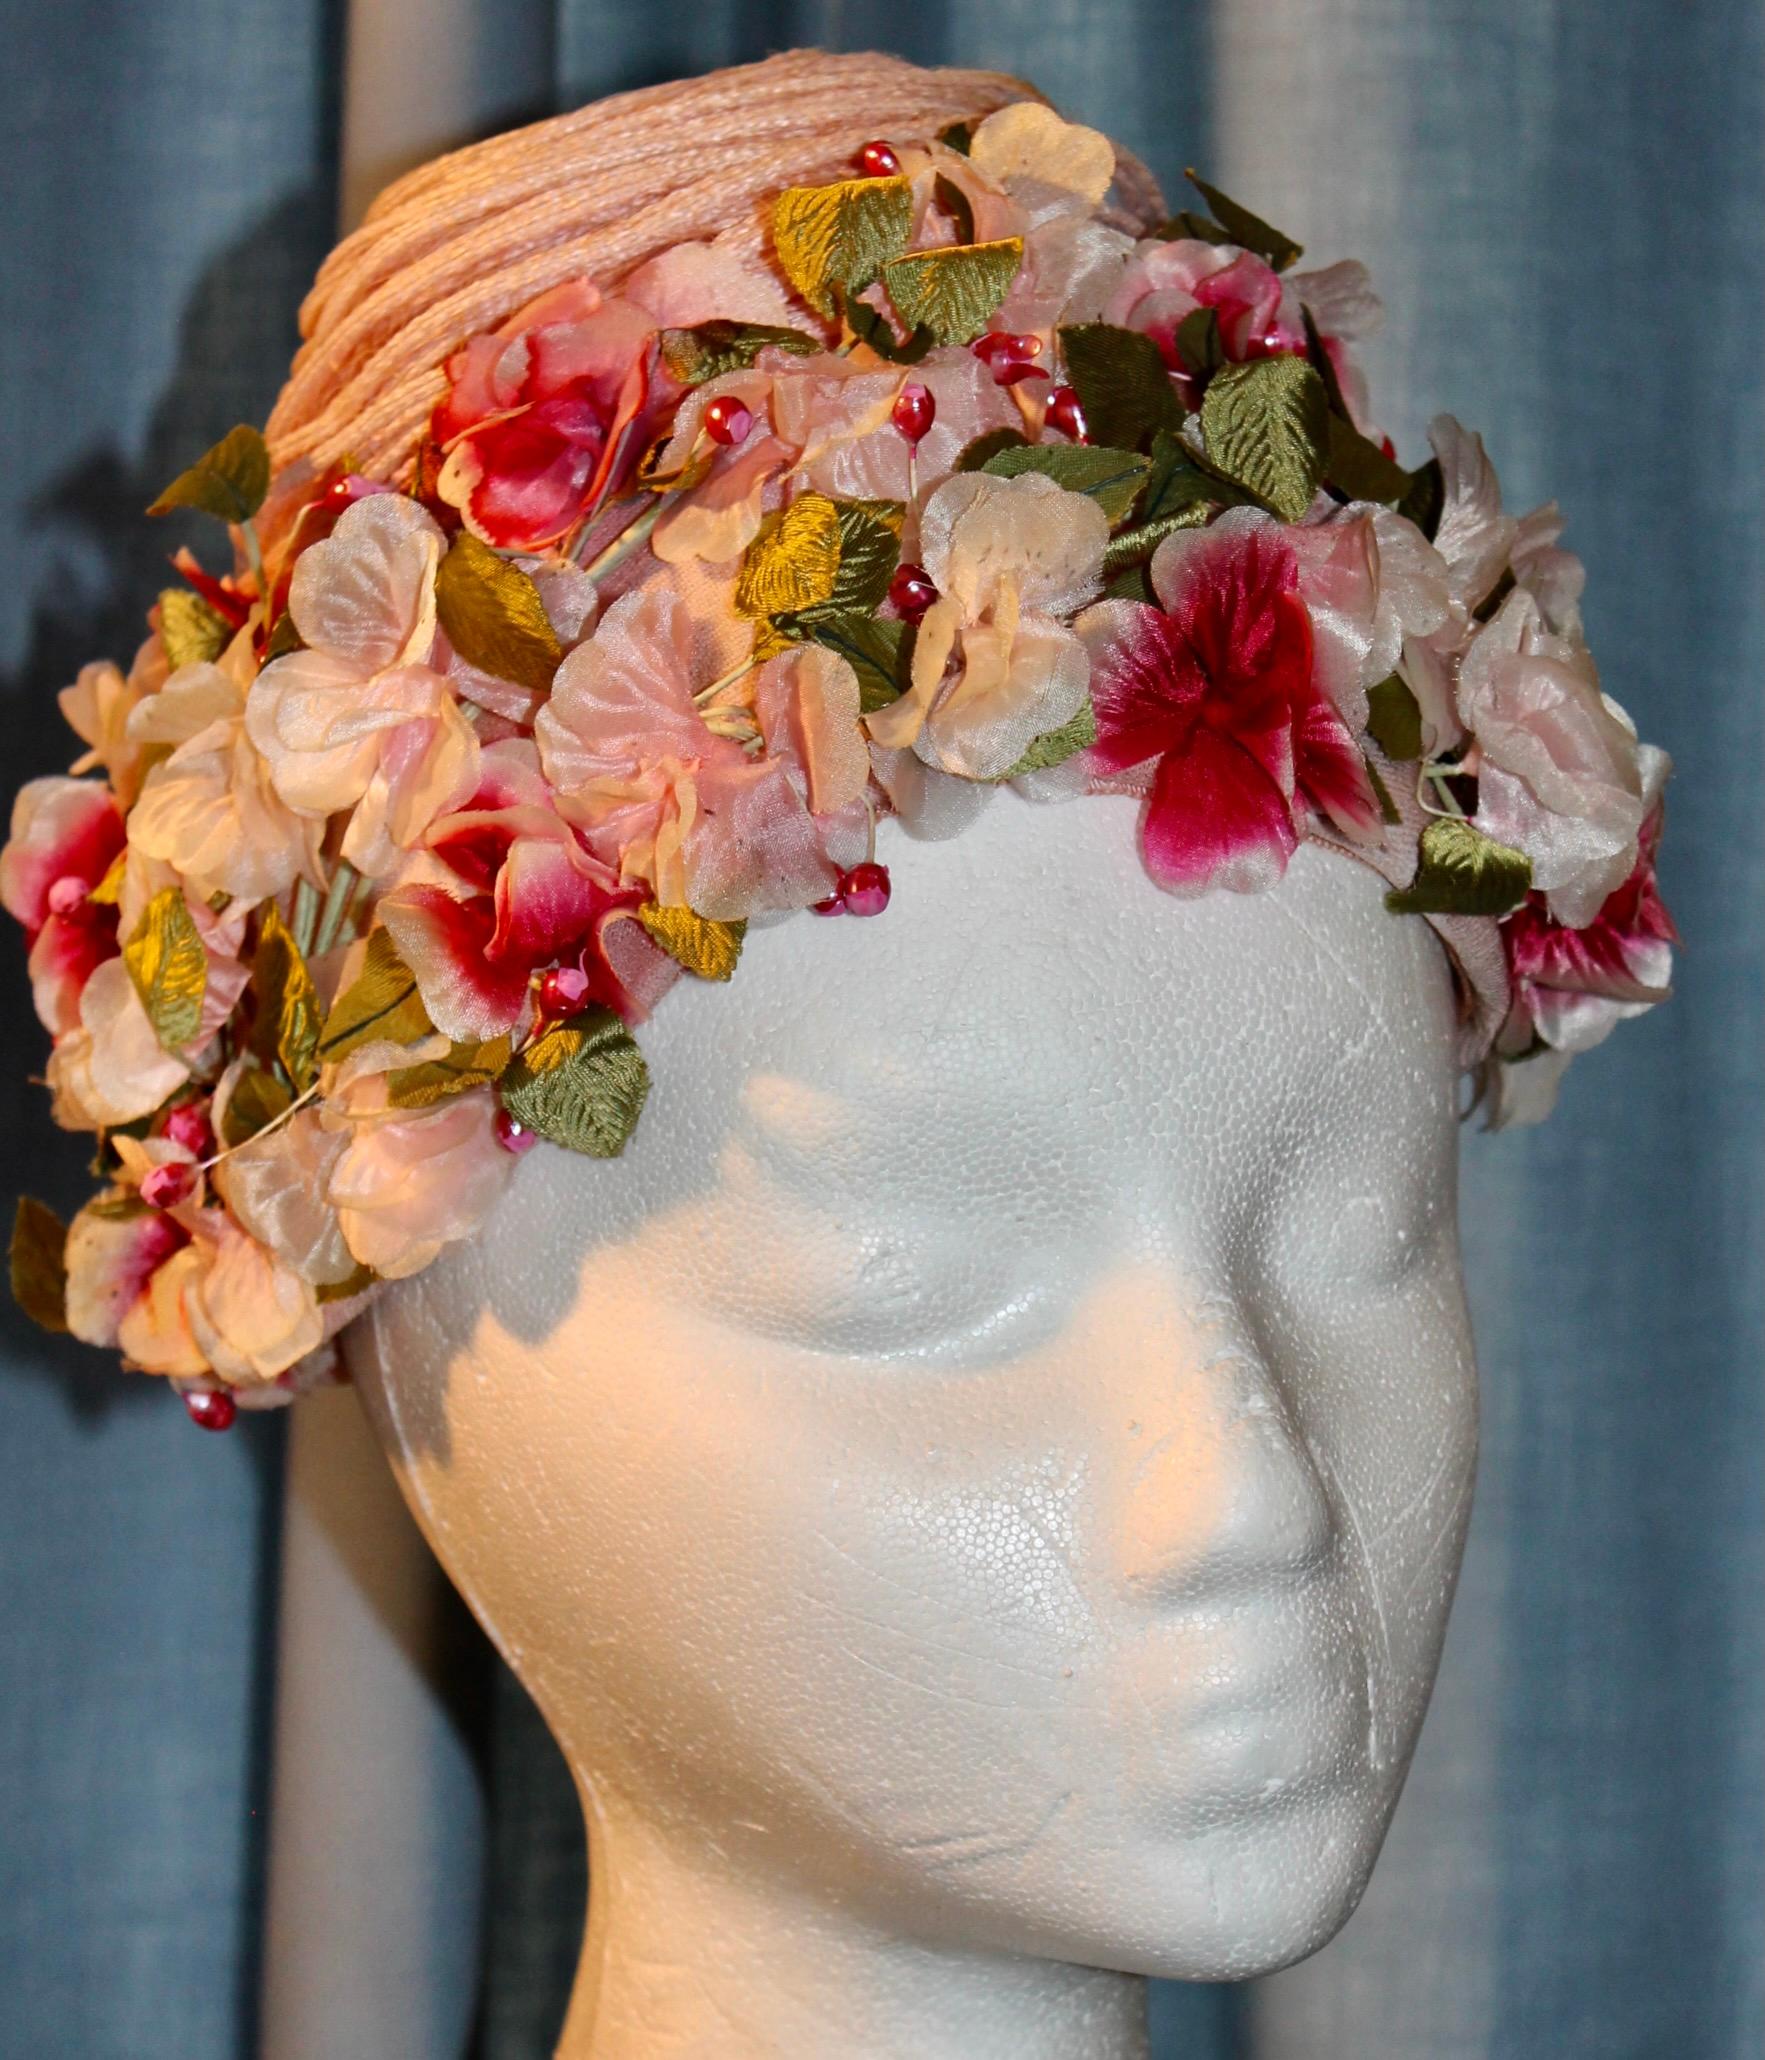 Elsa Schiaparelli Spring Hat with wreath of pastel silk flowers around the edge.
Wrapped straw, silken floss flowers, hand sewn attached to netting frame.
Topped with a pink swirling cord  'turban'.Outside measure 8